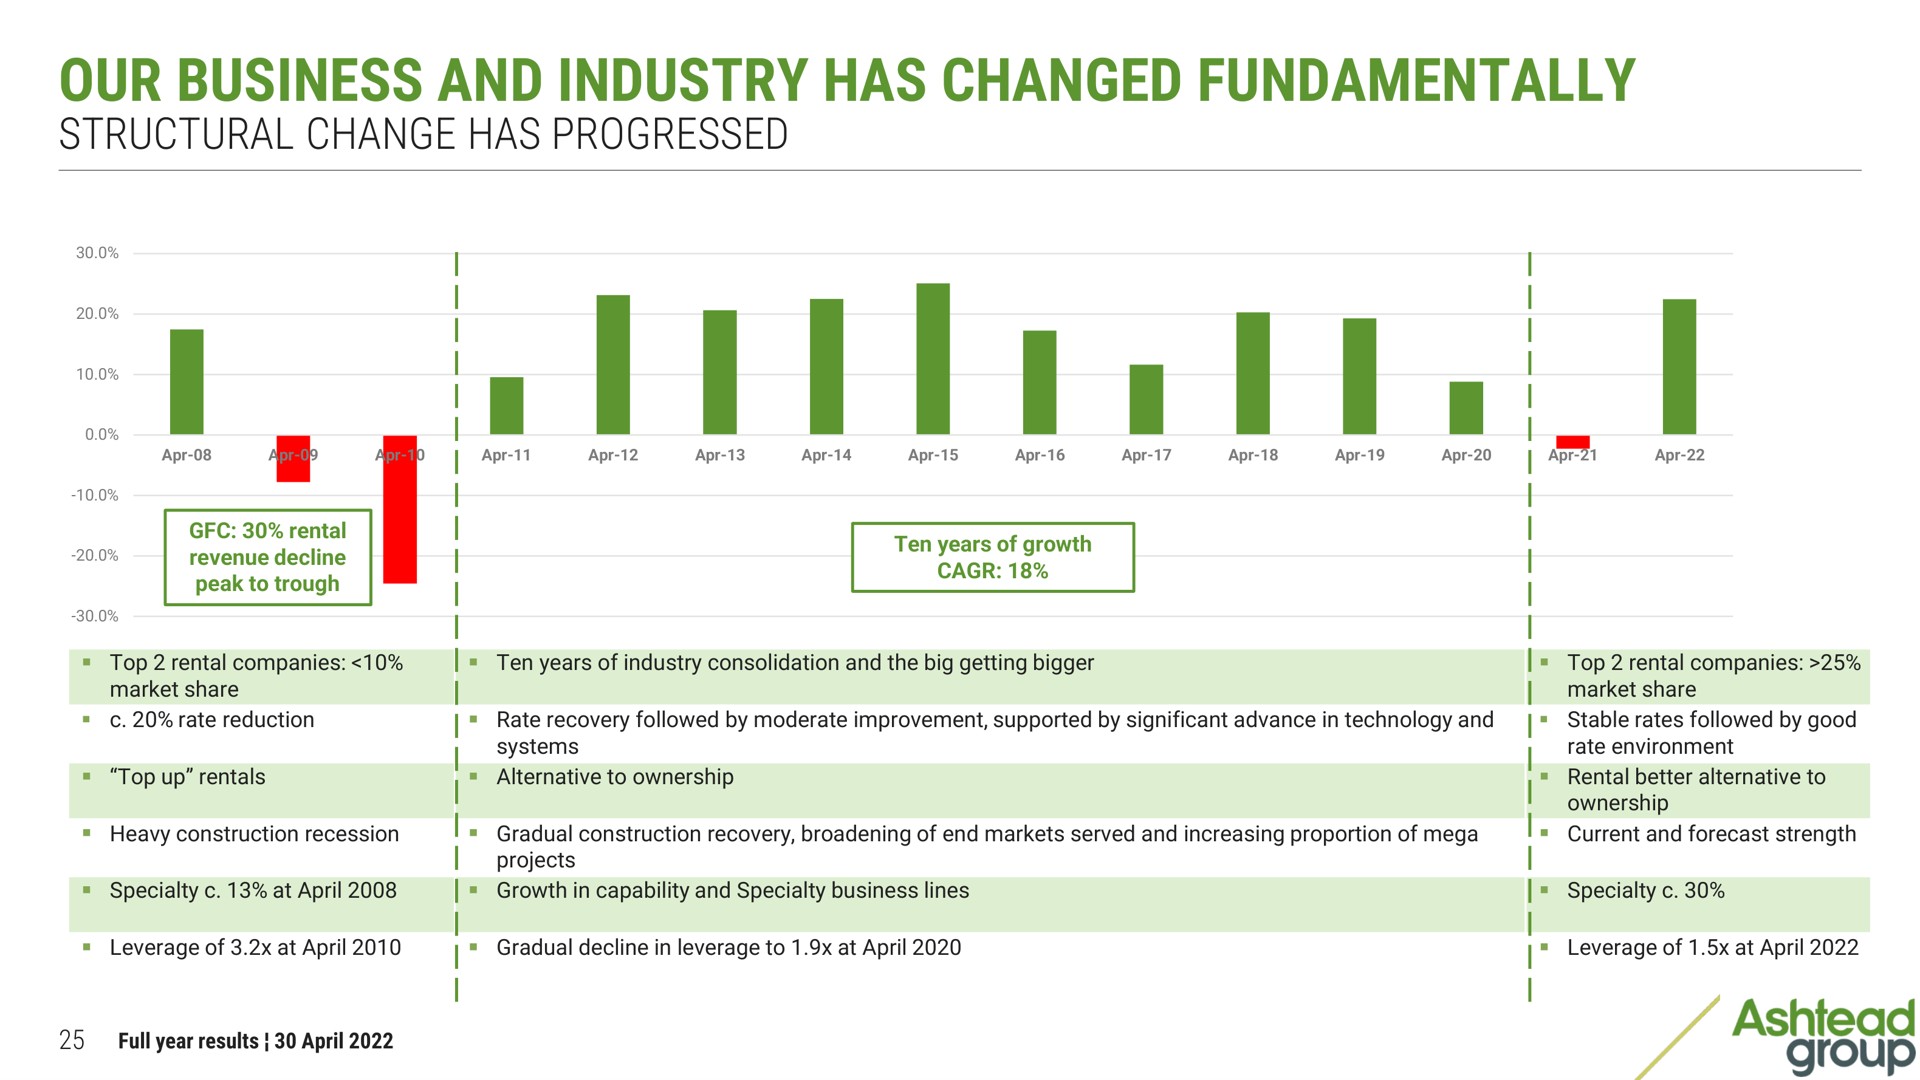 our business and industry has changed fundamentally structural change progressed | Ashtead Group